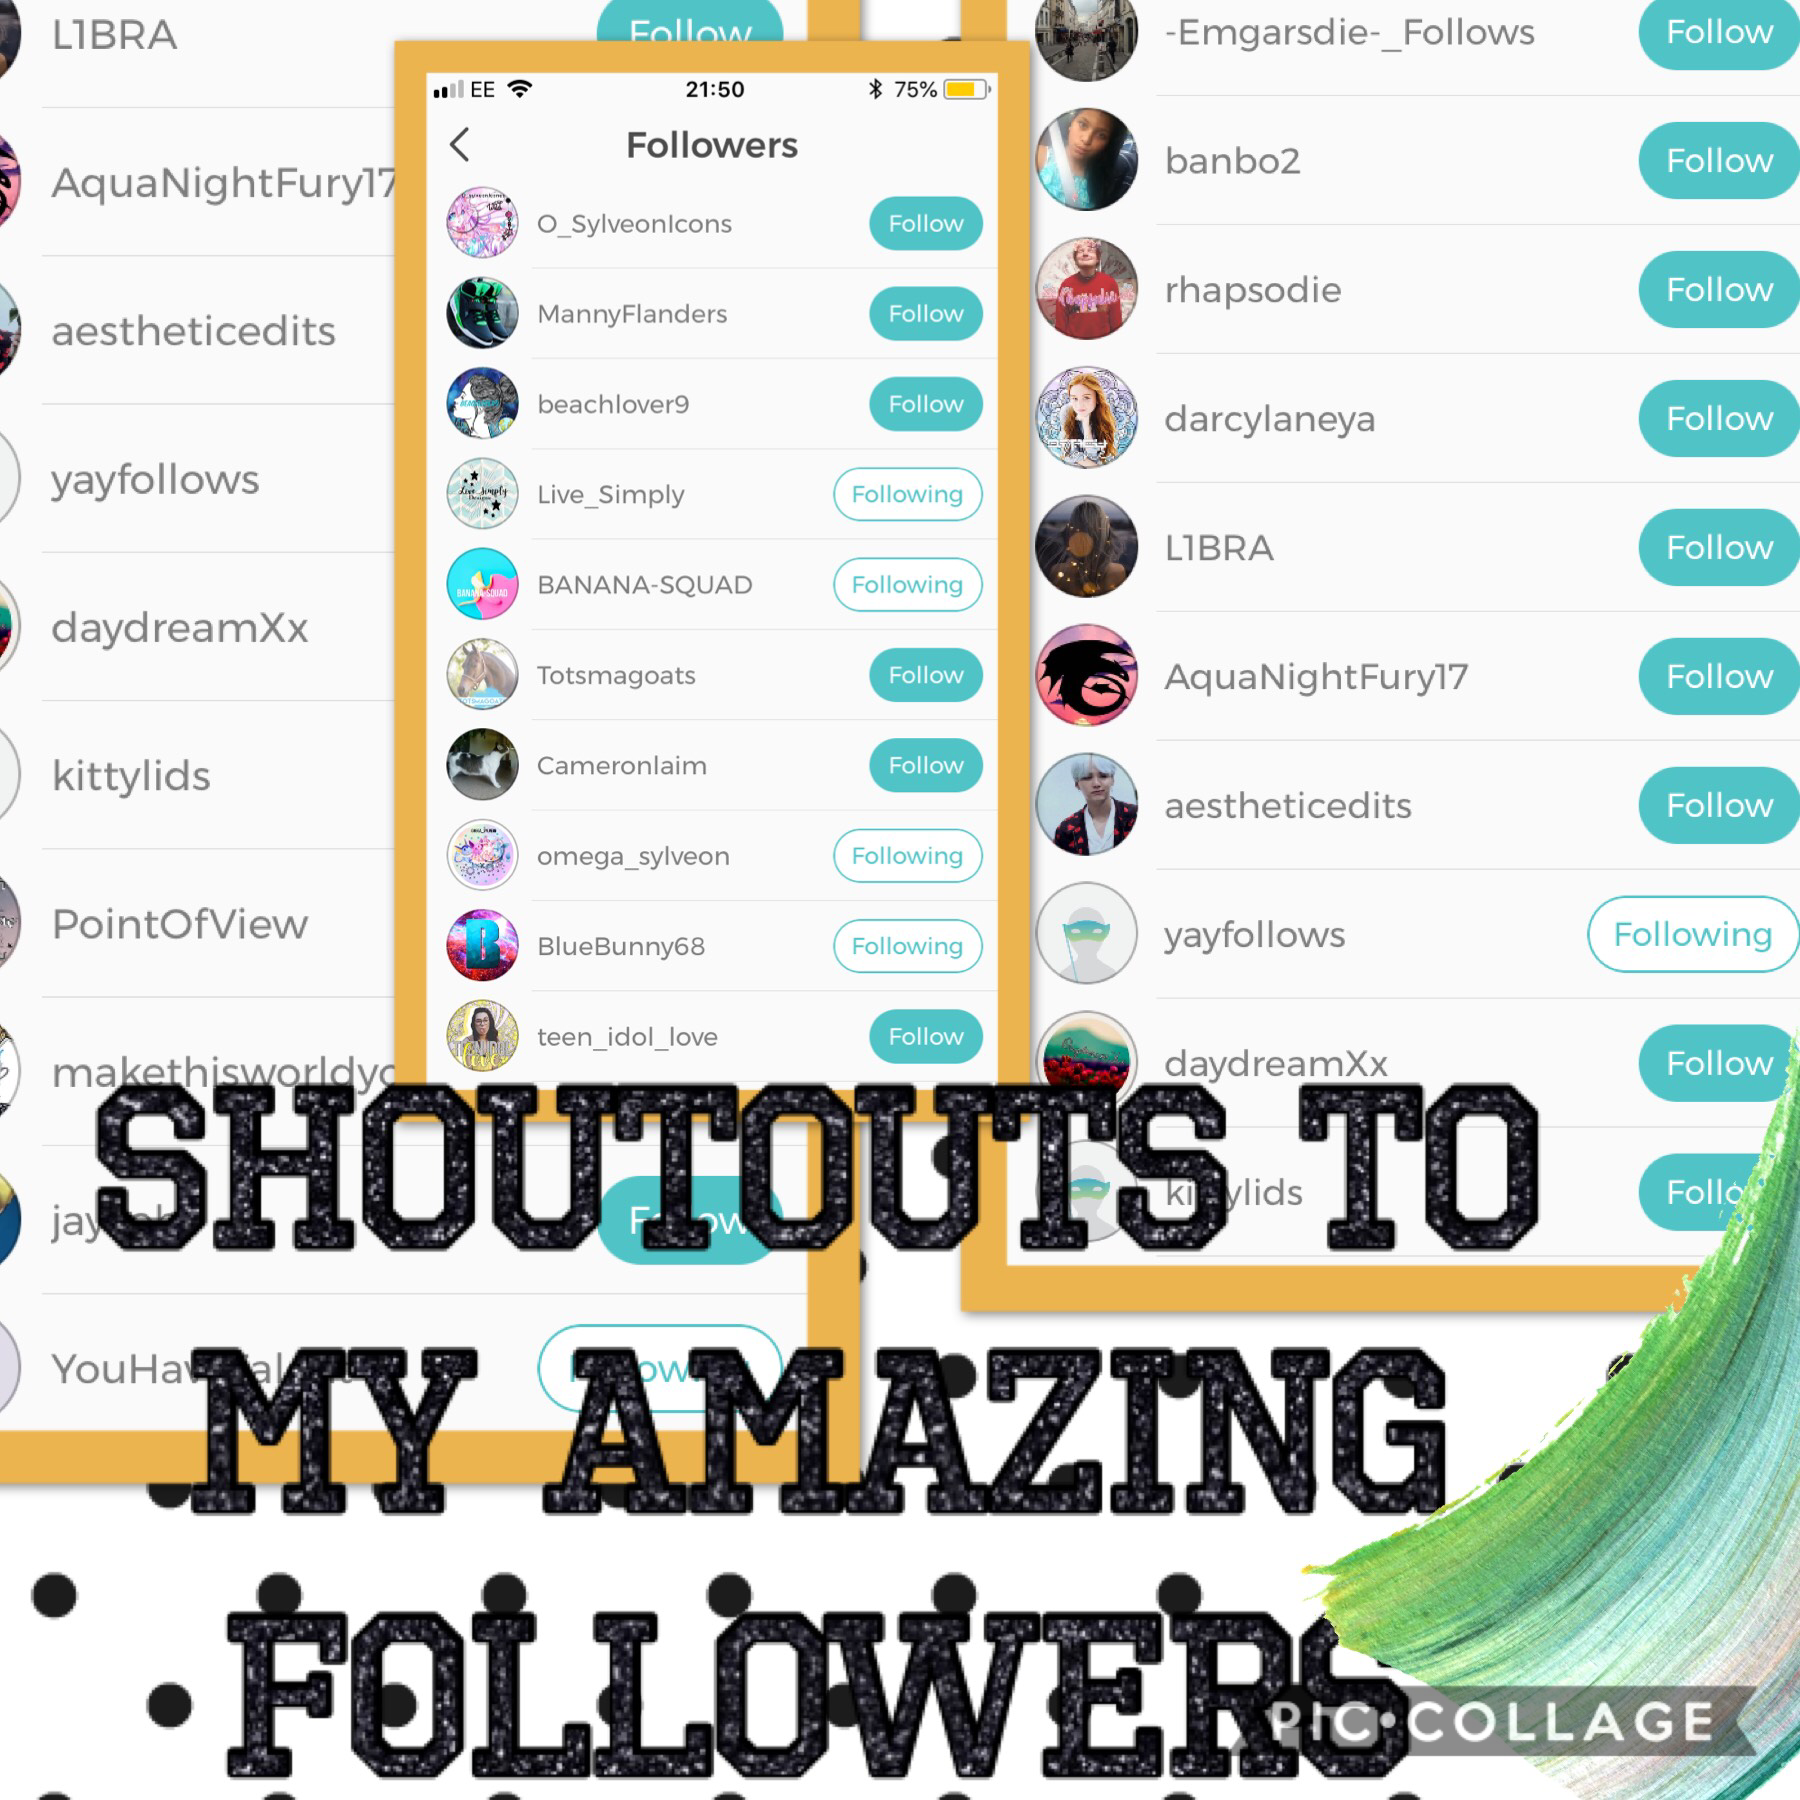 So if you’re not on this list and you follow me comment on this and let me know so I can give you a shoutout